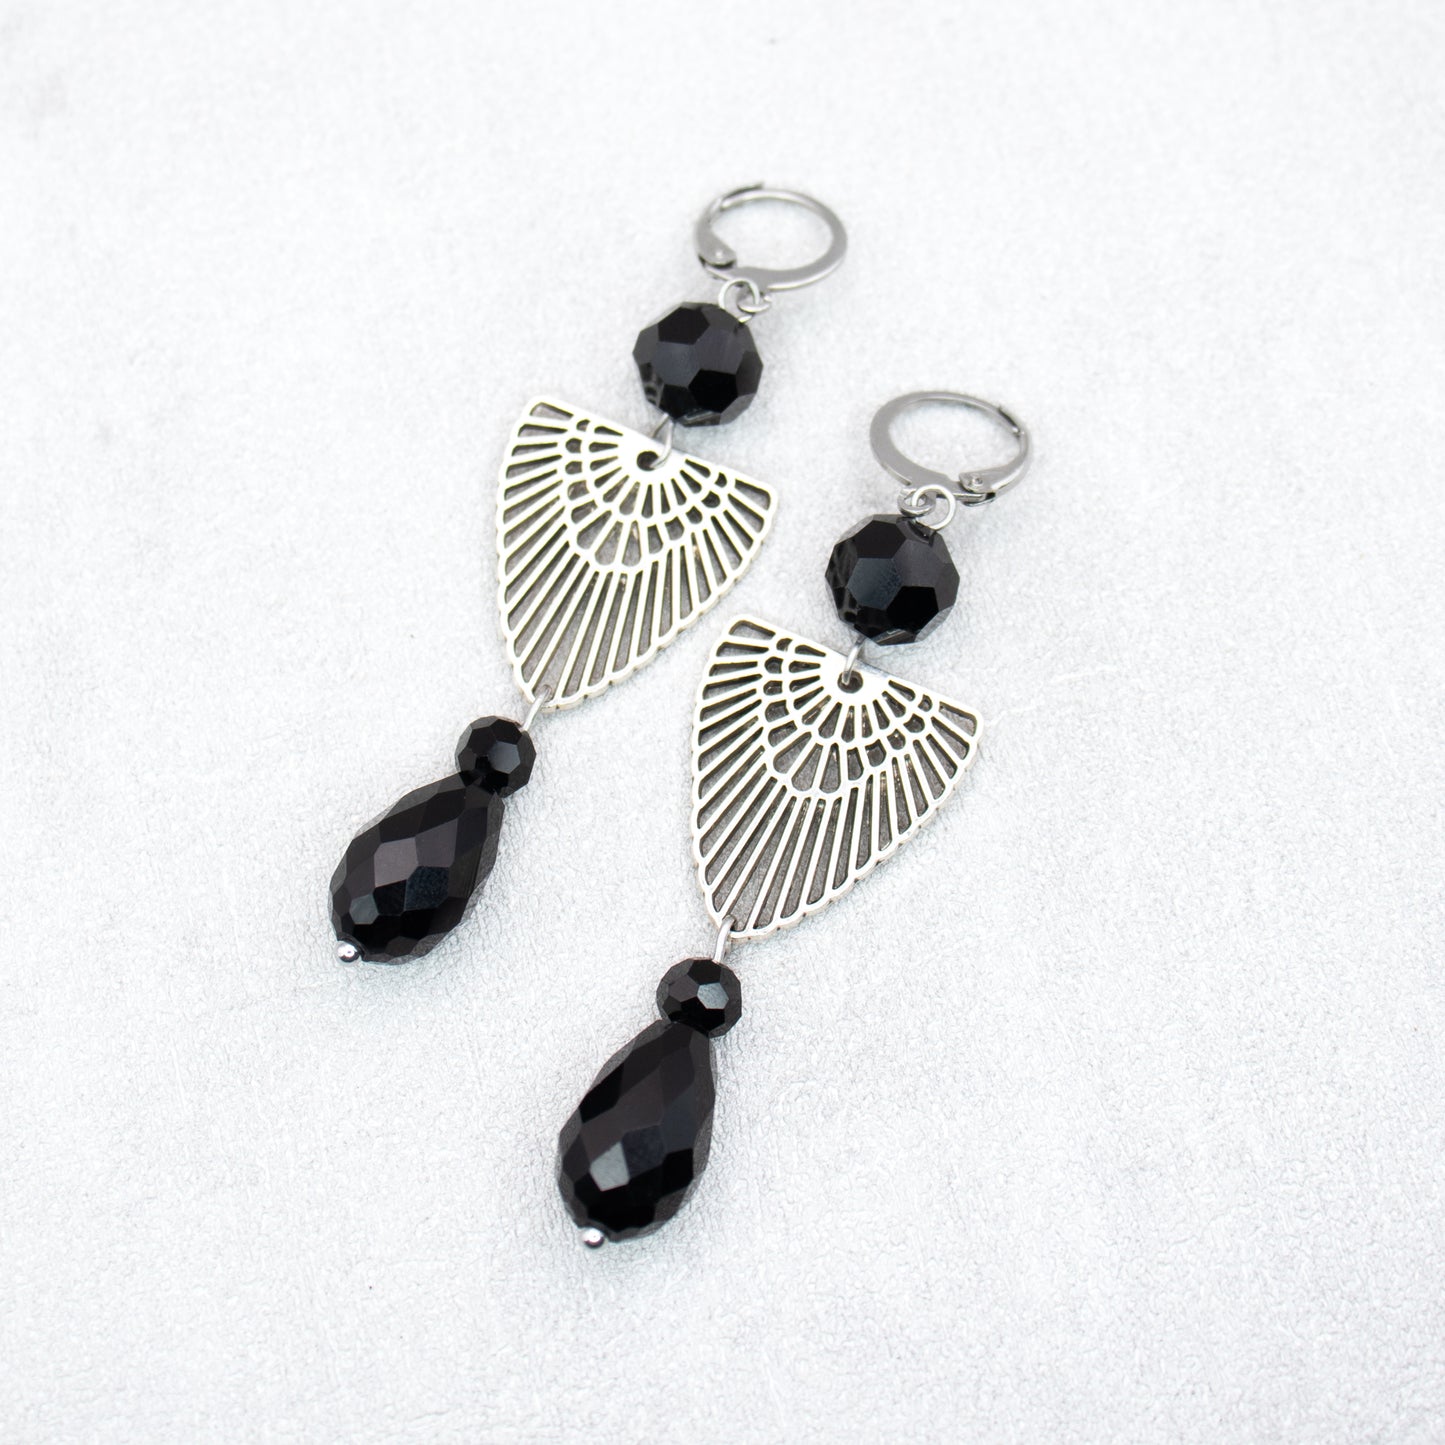 Black beads with silver charms. Handmade earrings.